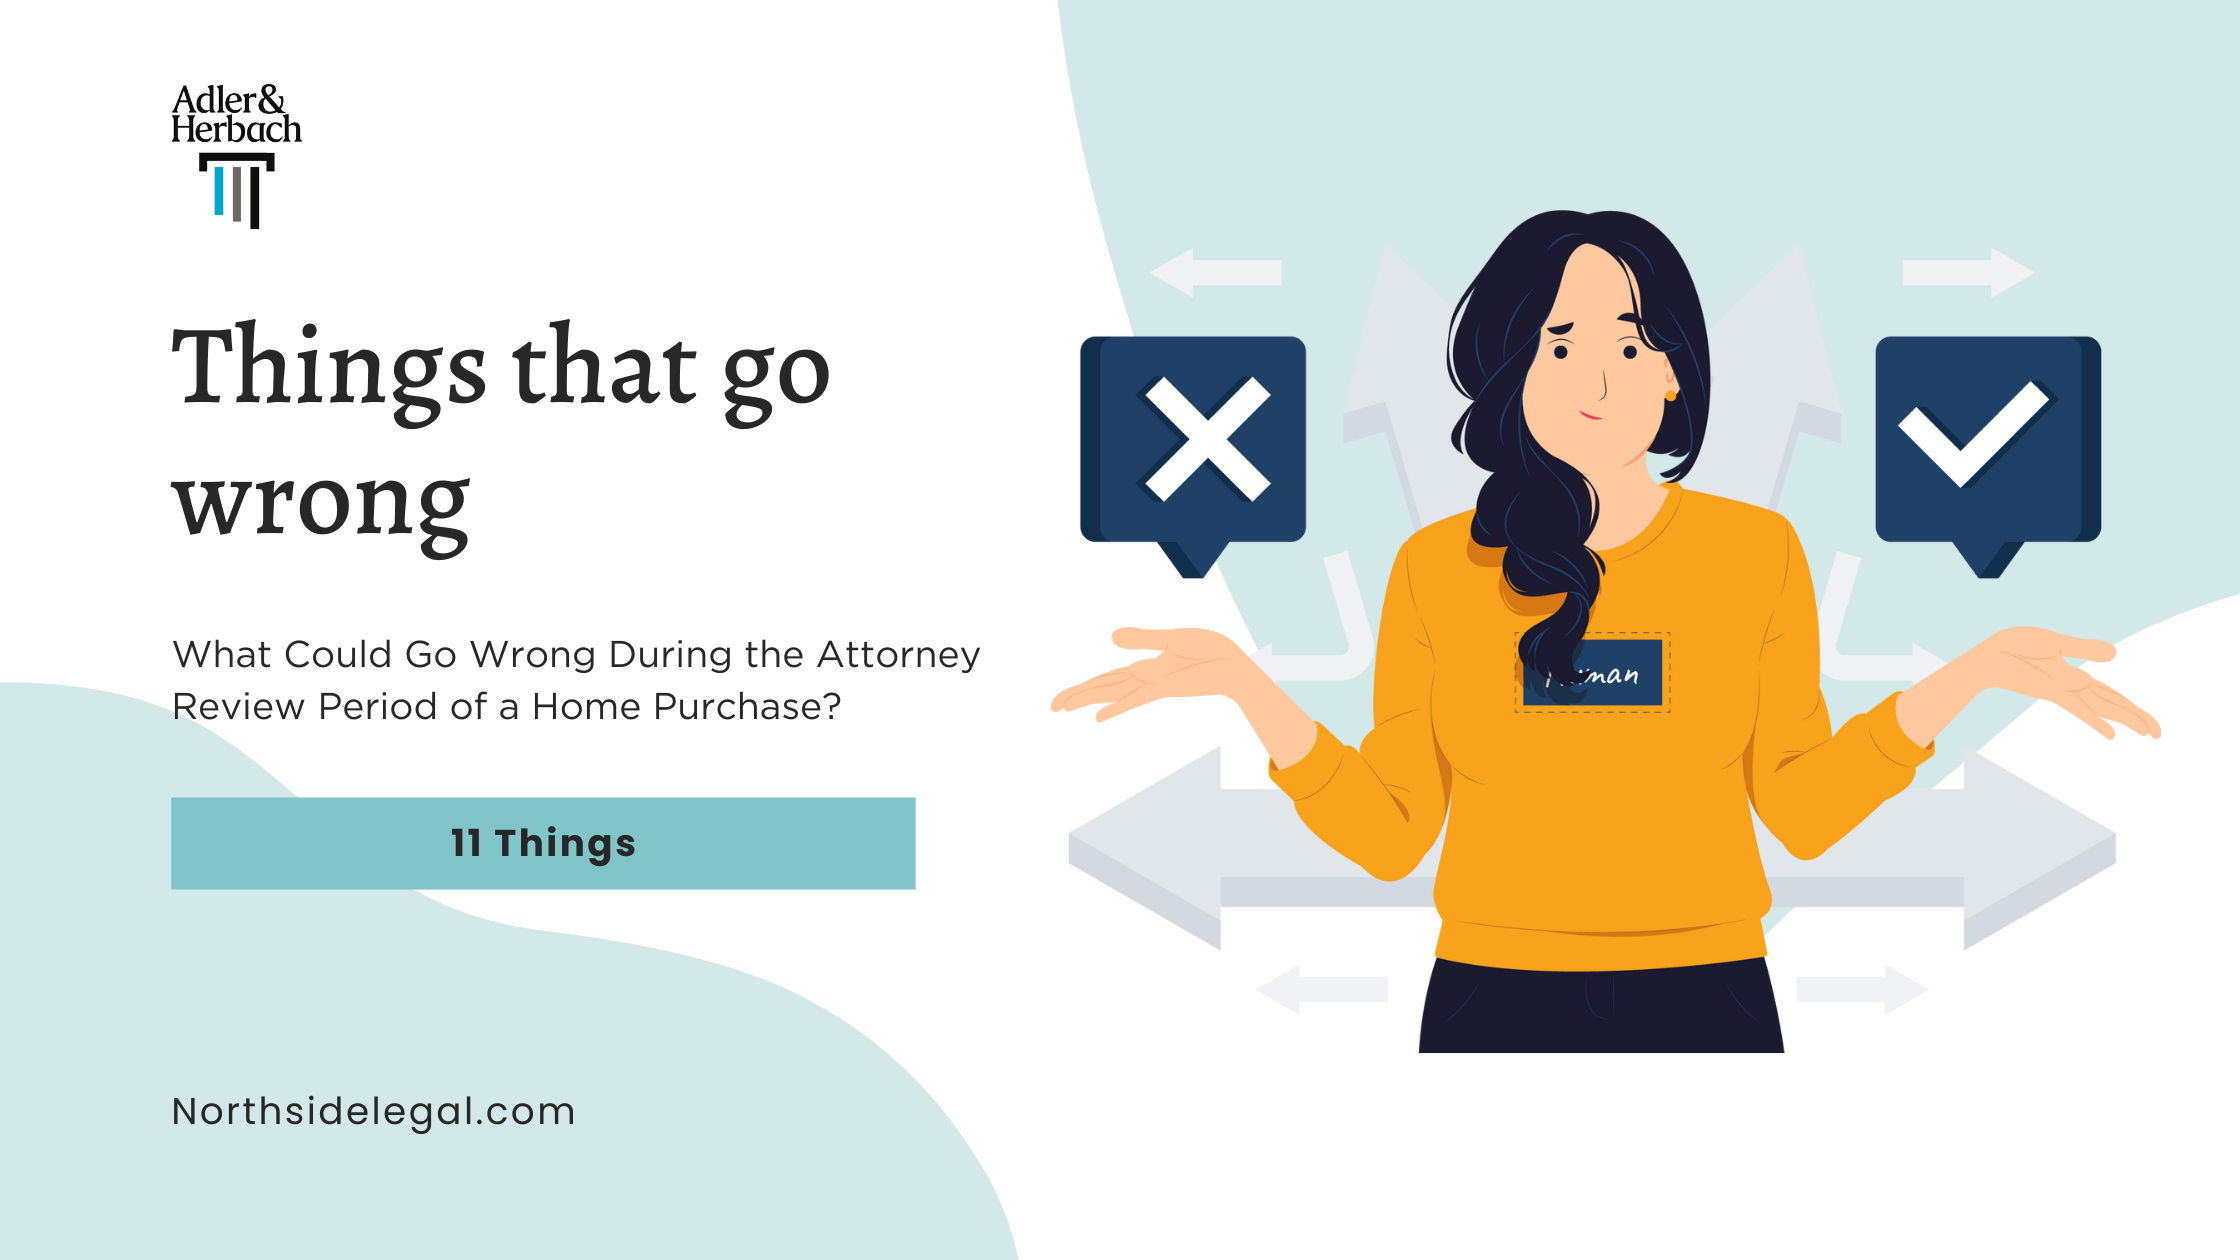 What Can Go Wrong During the Attorney Review Period? (13 Things)